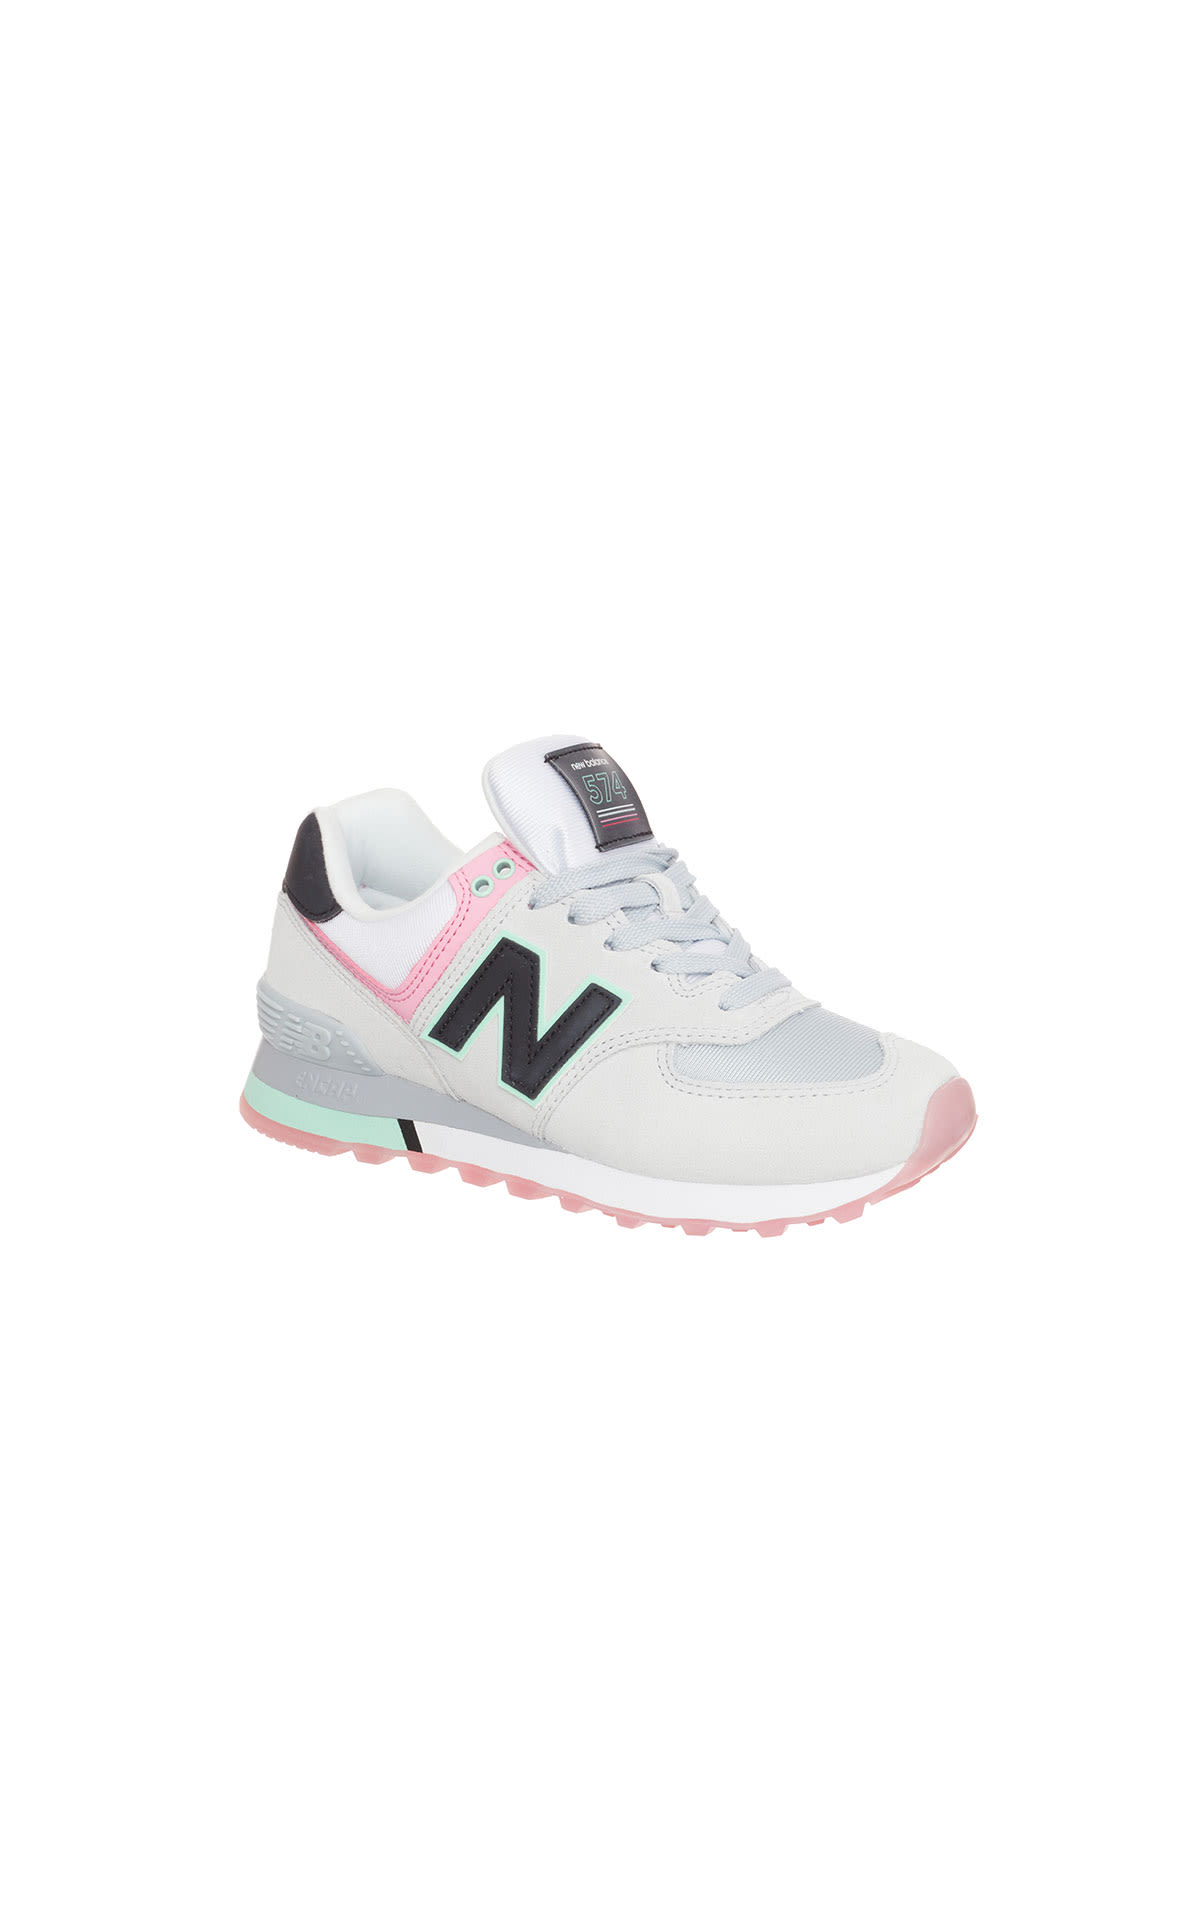 New Balance  574 sneaker from Bicester Village